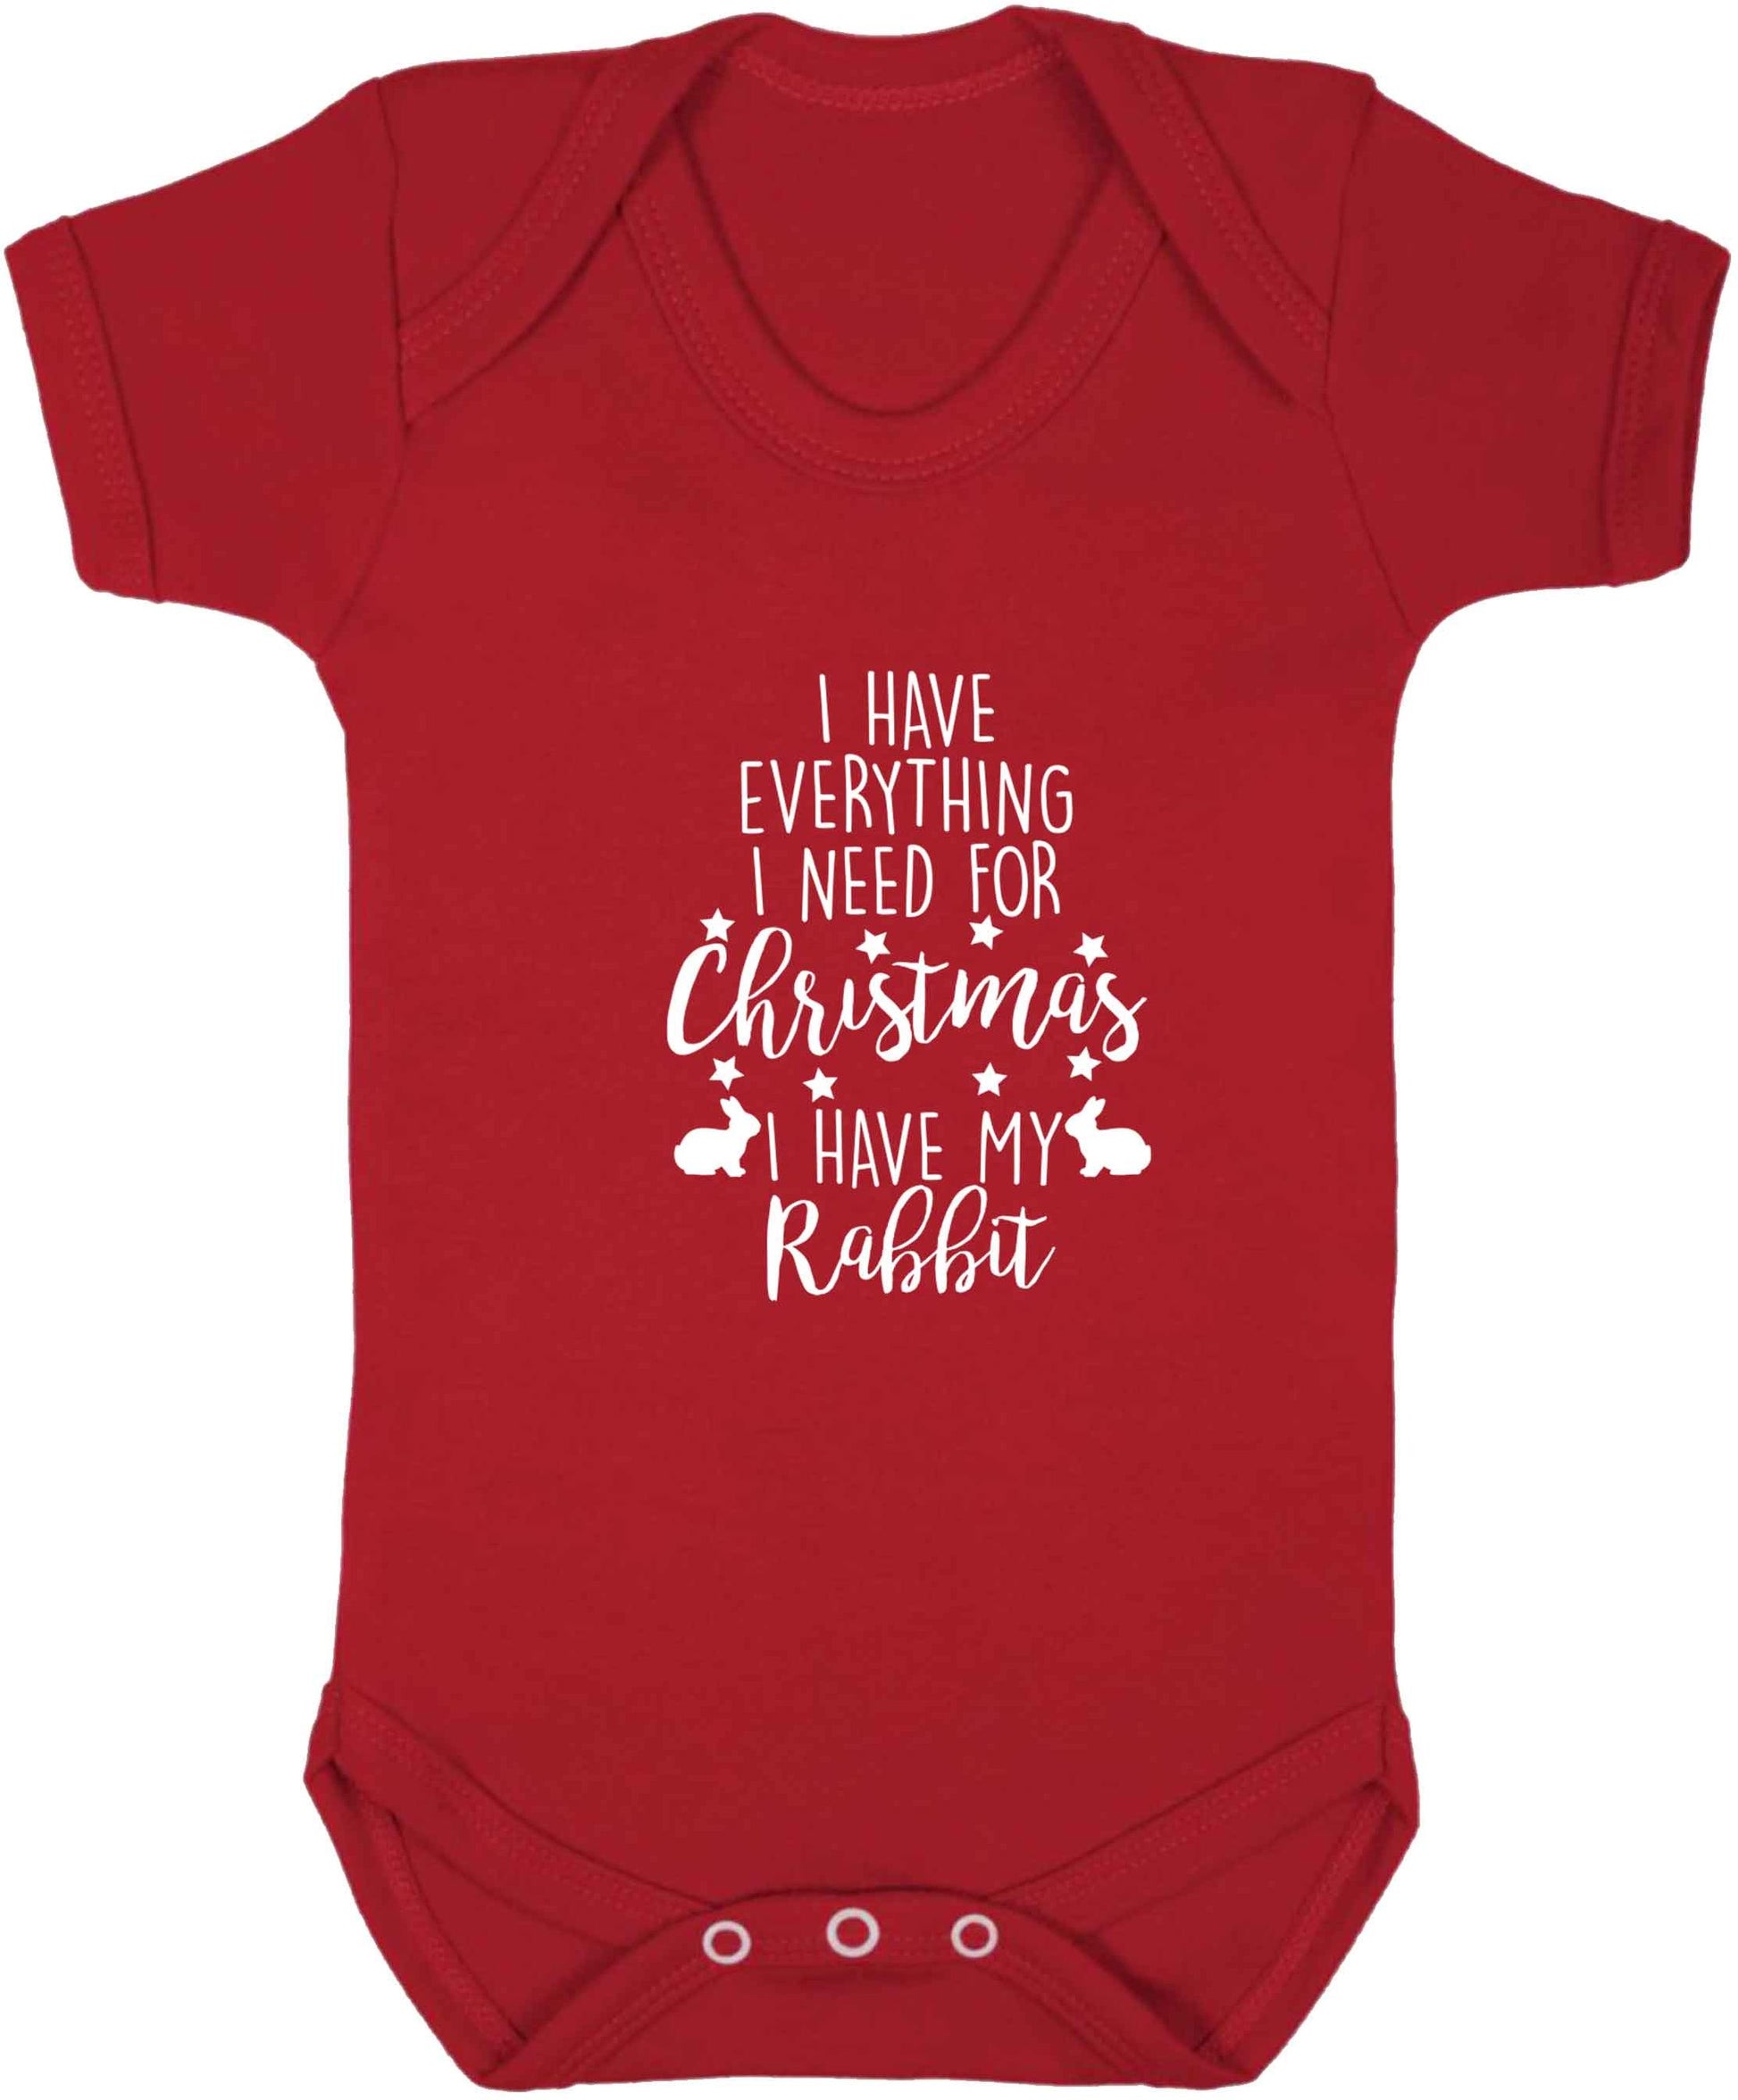 I have everything I need for Christmas I have my rabbit baby vest red 18-24 months